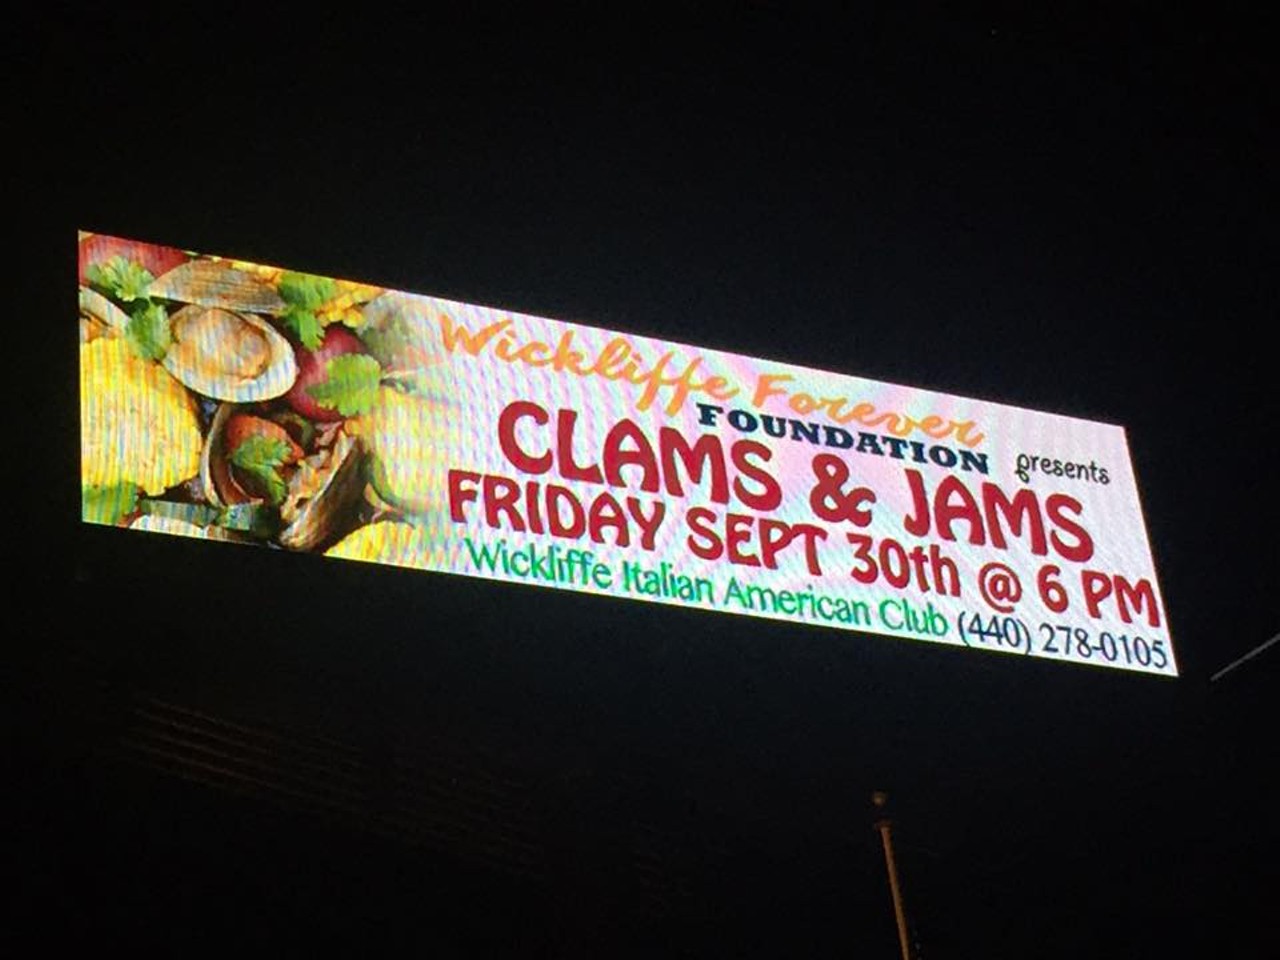 Clams & Jams 2016  When: Fri., Sept. 30, 6 p.m.-12 a.m.  Email: wickliffeforever@gmail.com  Price: 40.00  https://www.facebook.com/wickliffeforever Members from community group Wickliffe Forever are excited to host CLAMS & JAMS; an event that features a clambake including 1 dozen clams, &frac12; chicken, chowder and sides, live music, bottomless beer, wine and refreshments. There will also be games and raffles to win prizes. One lucky winner can take home a 50&#148; Samsung Smart T.V, just in time to watch your fall season favorites. This event will take place on Friday September 30th at the Italian and American Club in Wickliffe starting at 6pm.